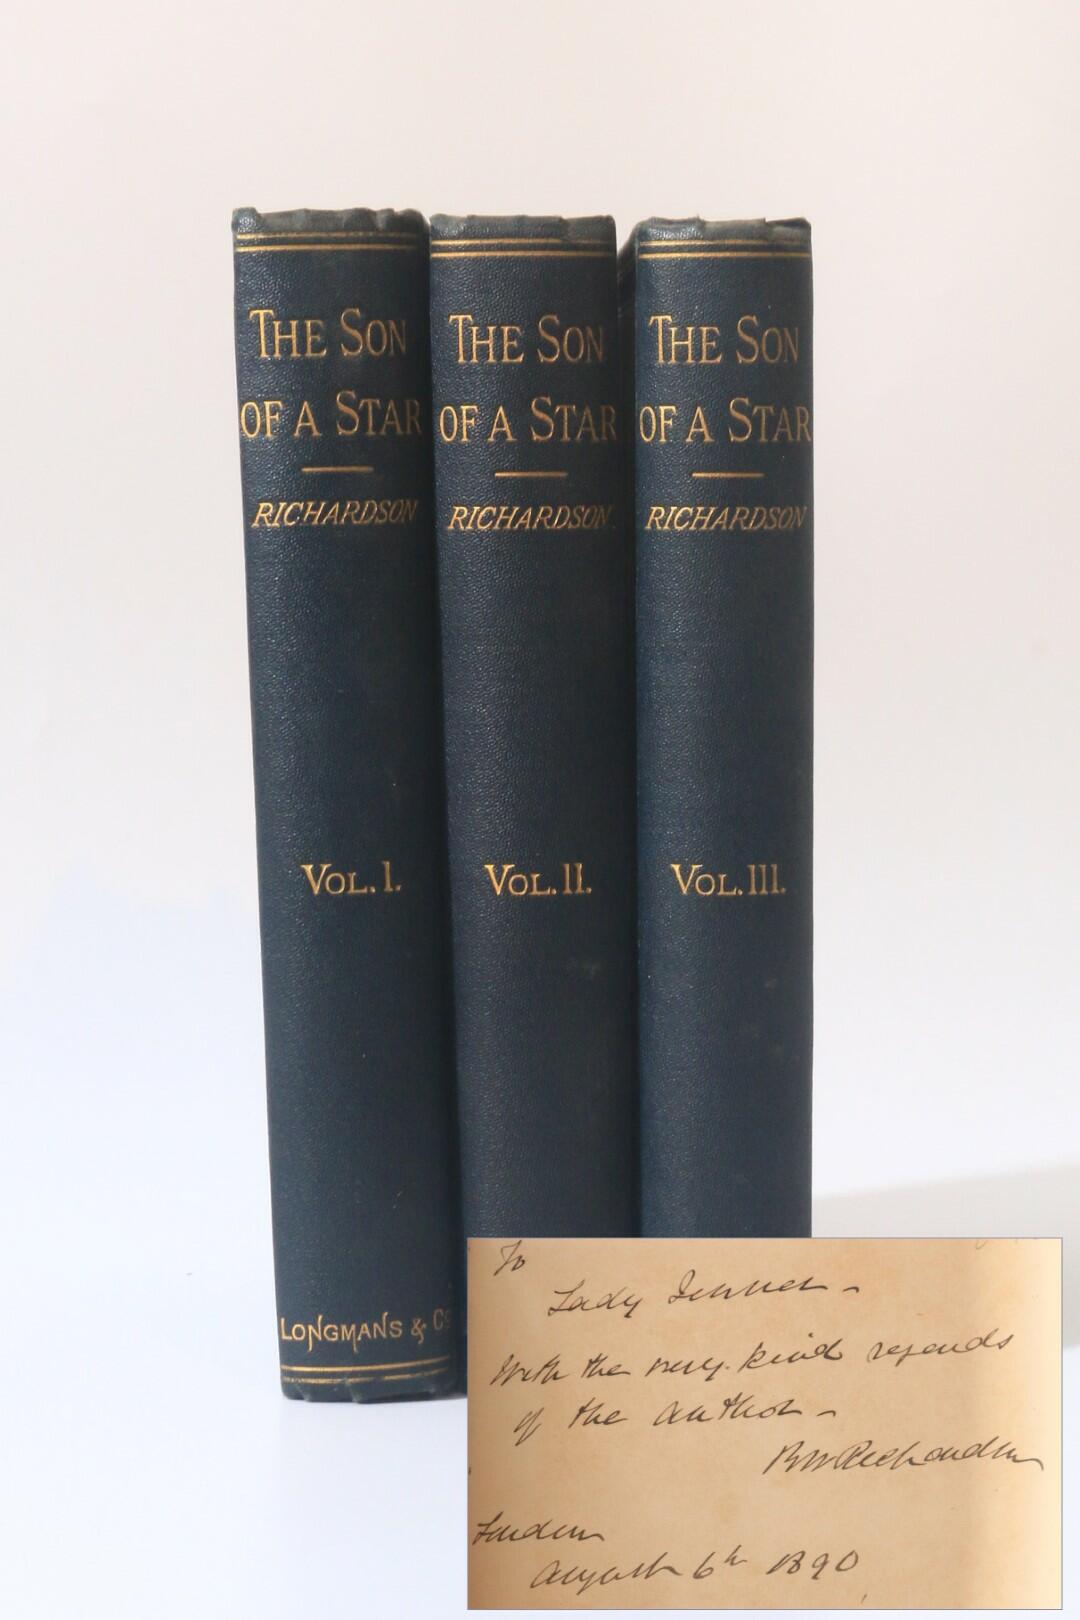 Benjamin Ward Richardson - The Son of a Star; A Romance of the Second Century - Longmans, Green & Co., 1888, First Edition.